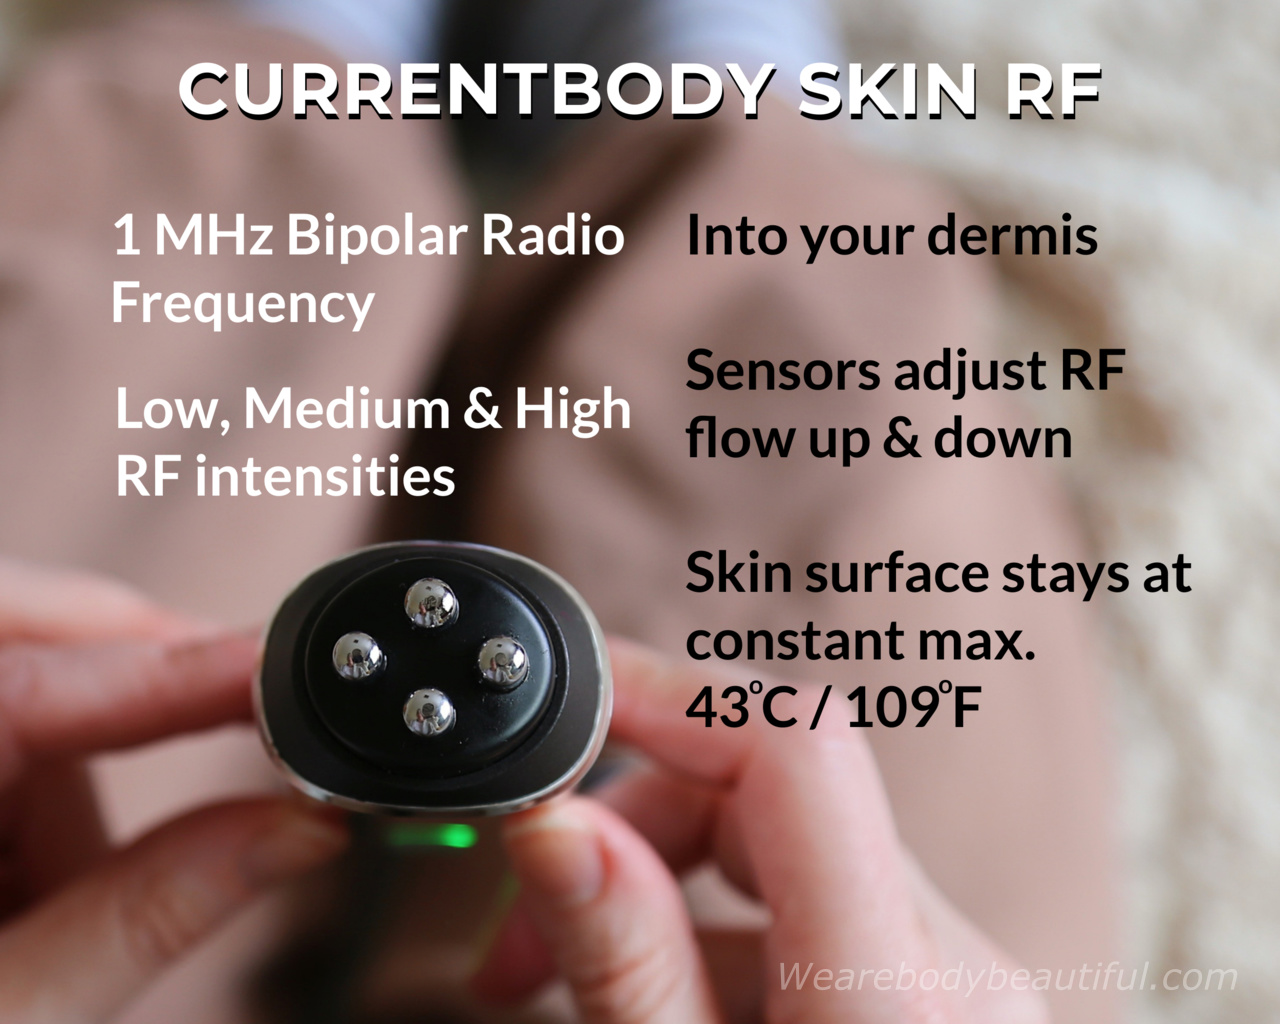 The CurrentBody Skin RF device sends 1MHz Bipolar Radio Frequency into your dermis. You can choose from low, medium and high RF intensities. The temperature sensors under the electrodes adjust the RF up & down to keep your skin surface temp at 43℃ / 109°F. 